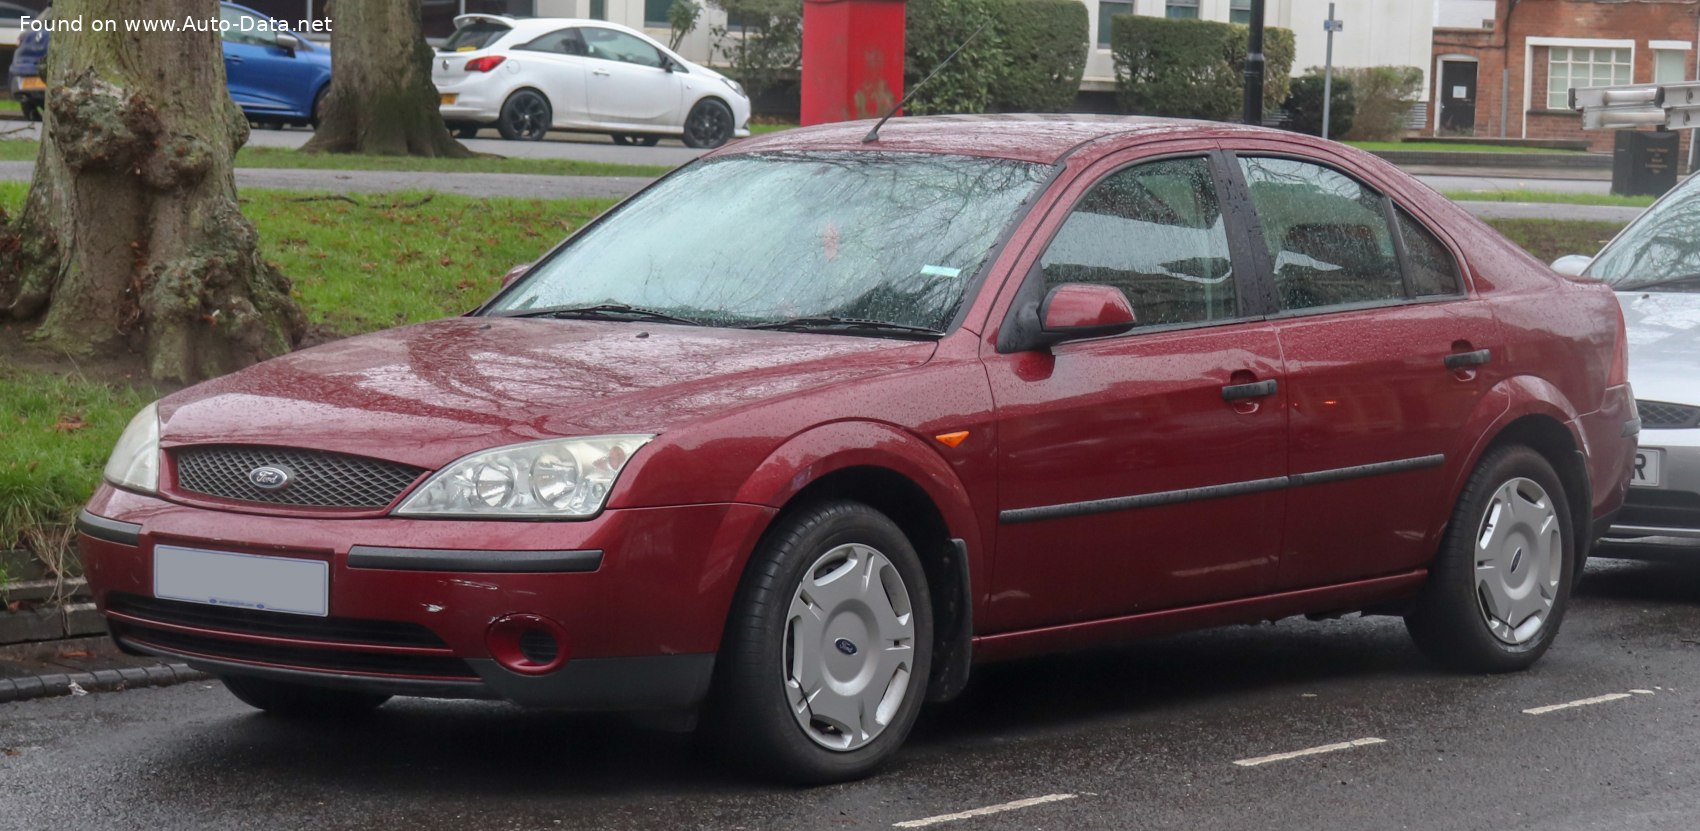 Panorama Gemaakt van ontploffing 2001 Ford Mondeo II Hatchback 2.0 16V (145 Hp) | Technical specs, data,  fuel consumption, Dimensions